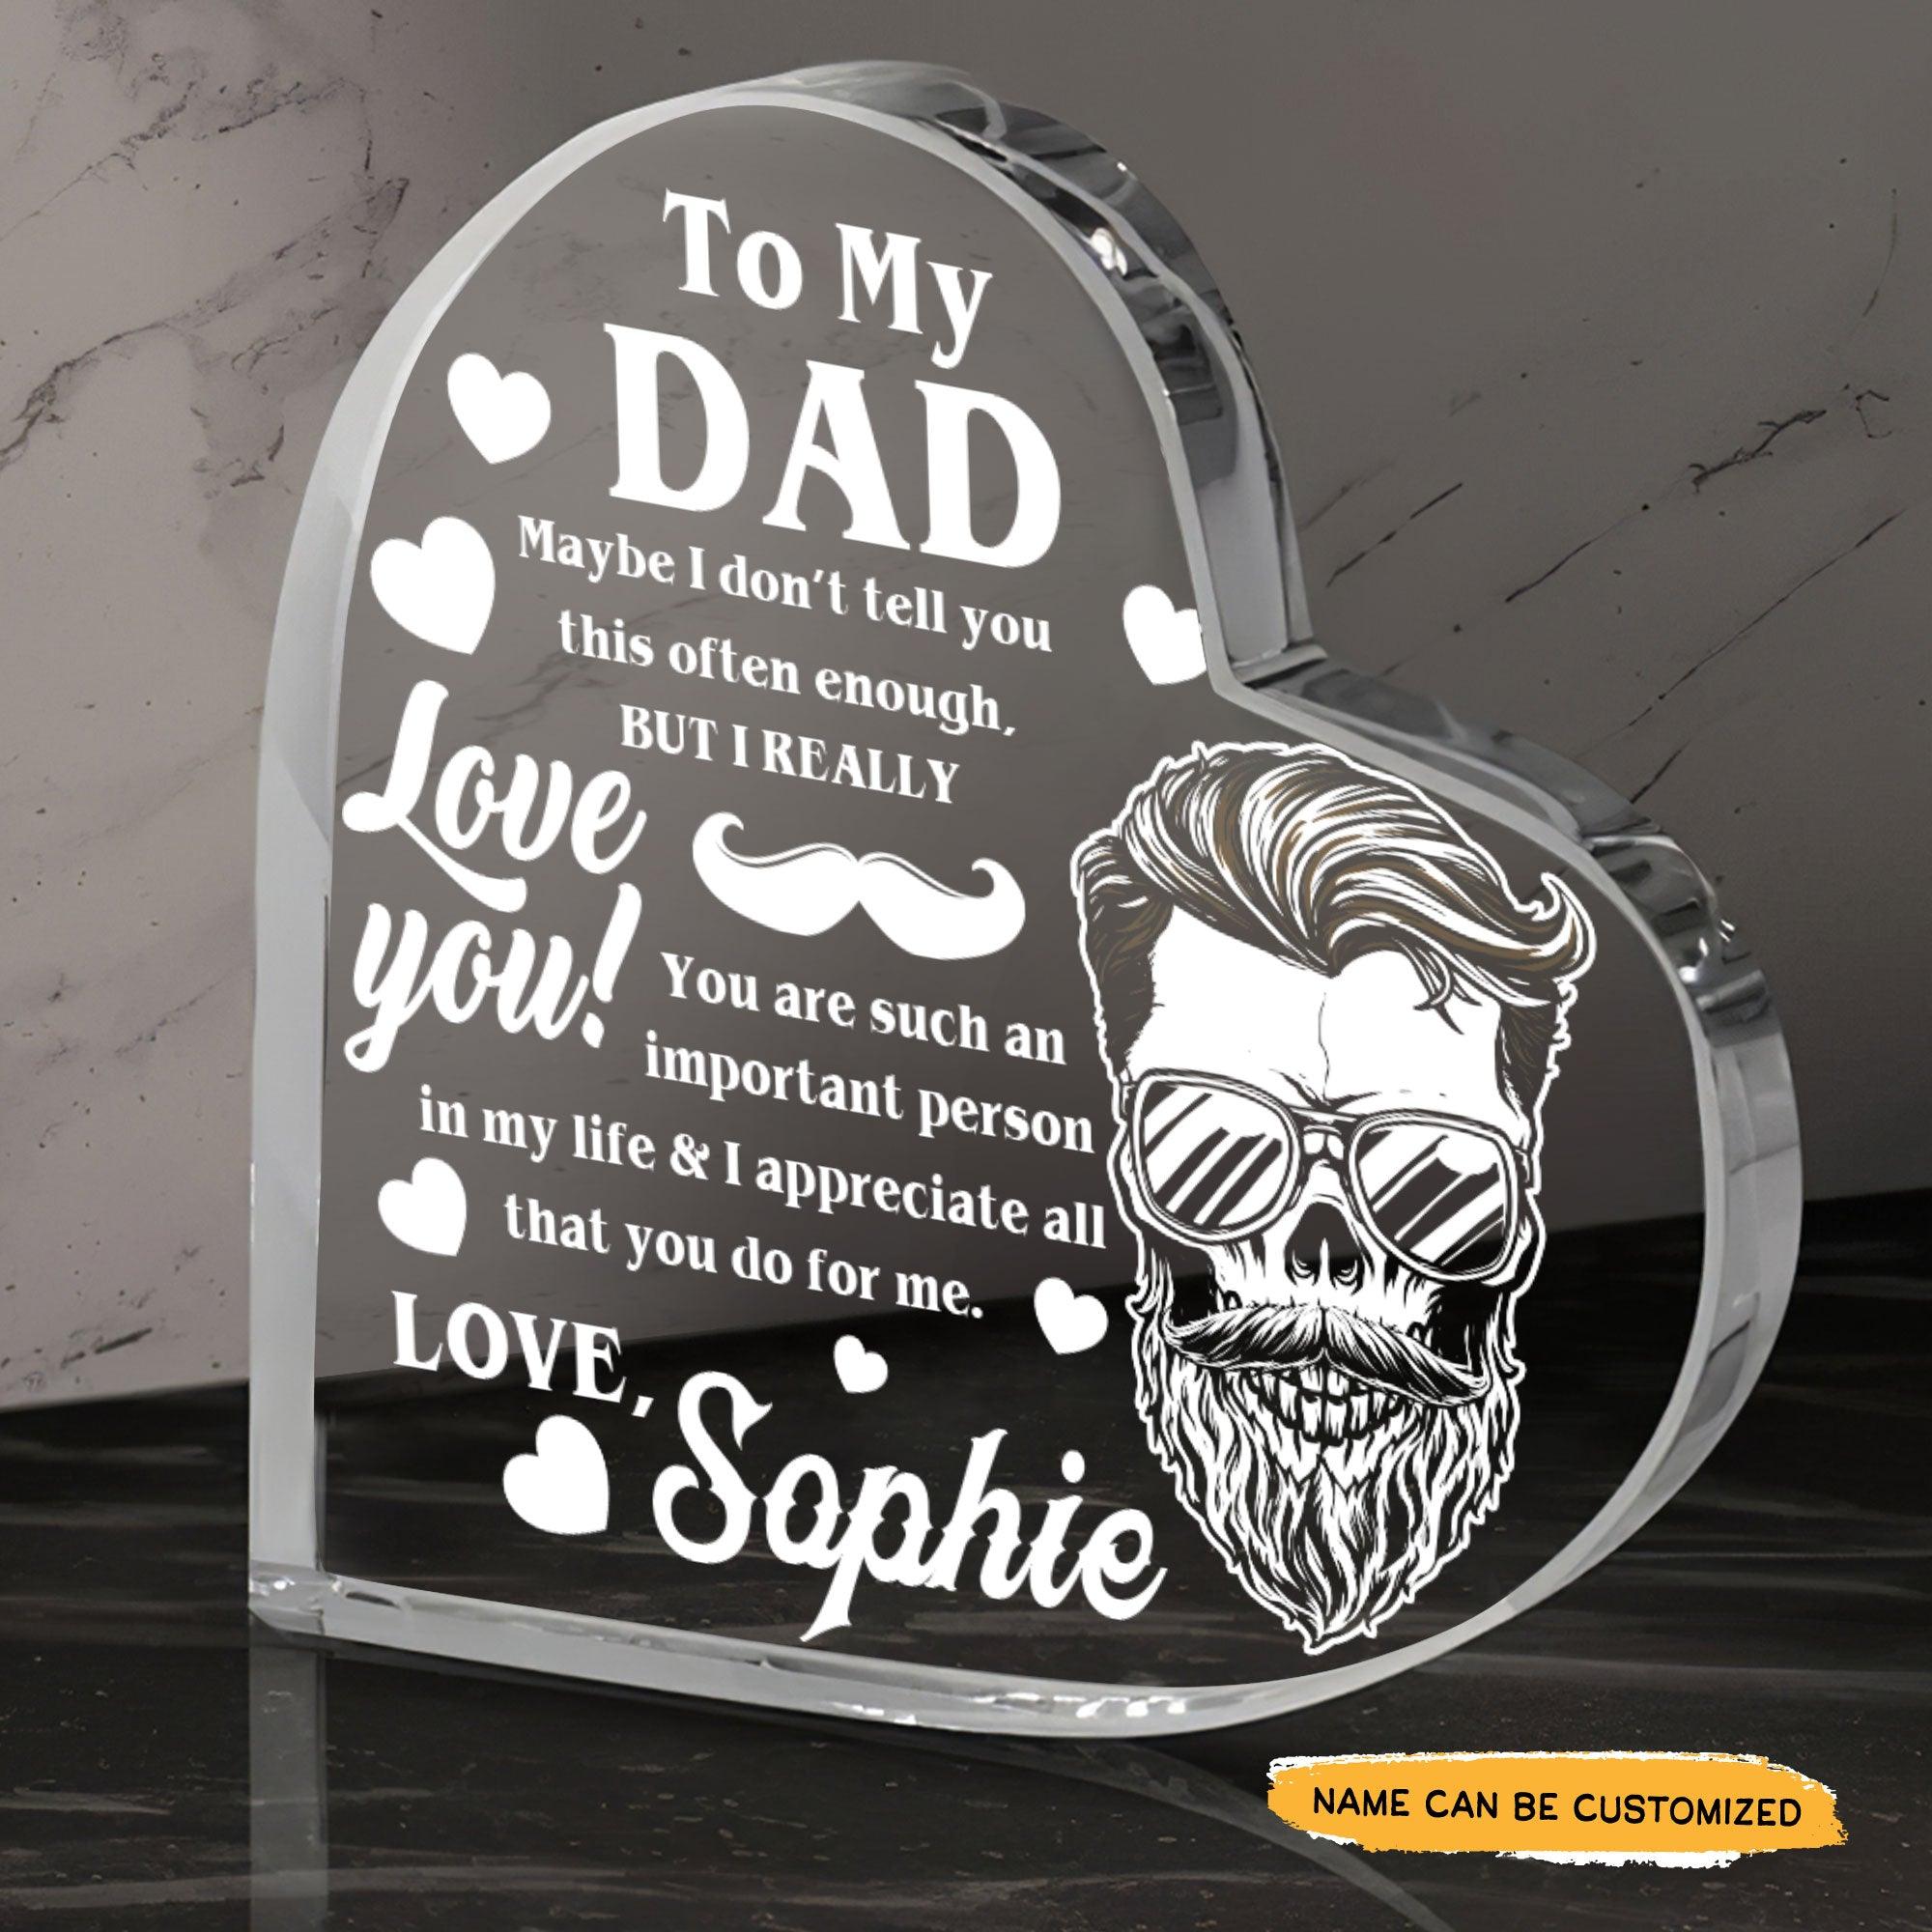 To My Dad I Love You - Customized Skull Crystal Heart Anniversary Gifts - Wonder Skull